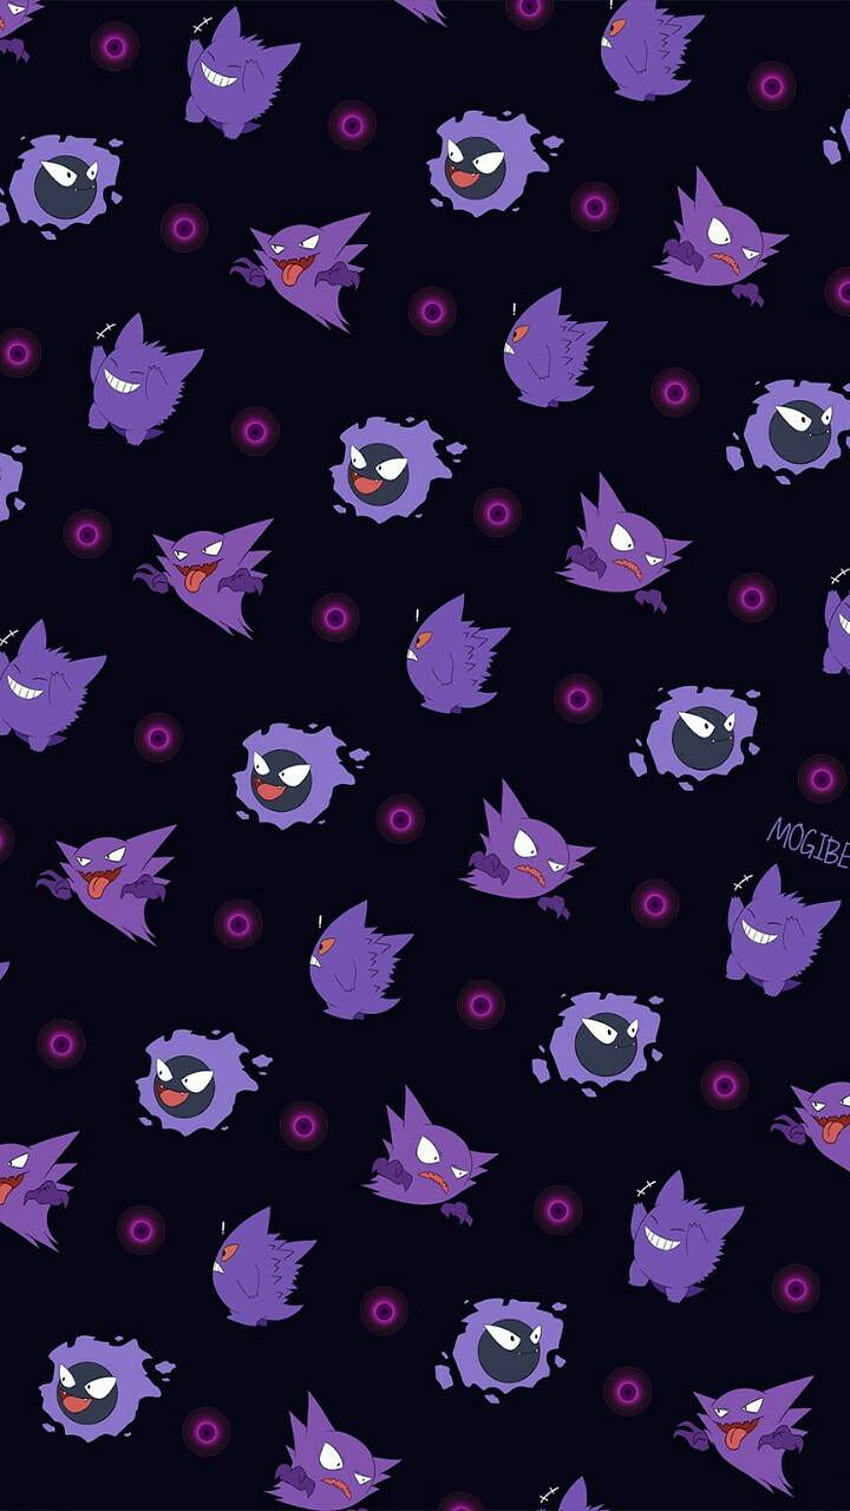 Gastly Android, Gastly Pokemon HD phone wallpaper